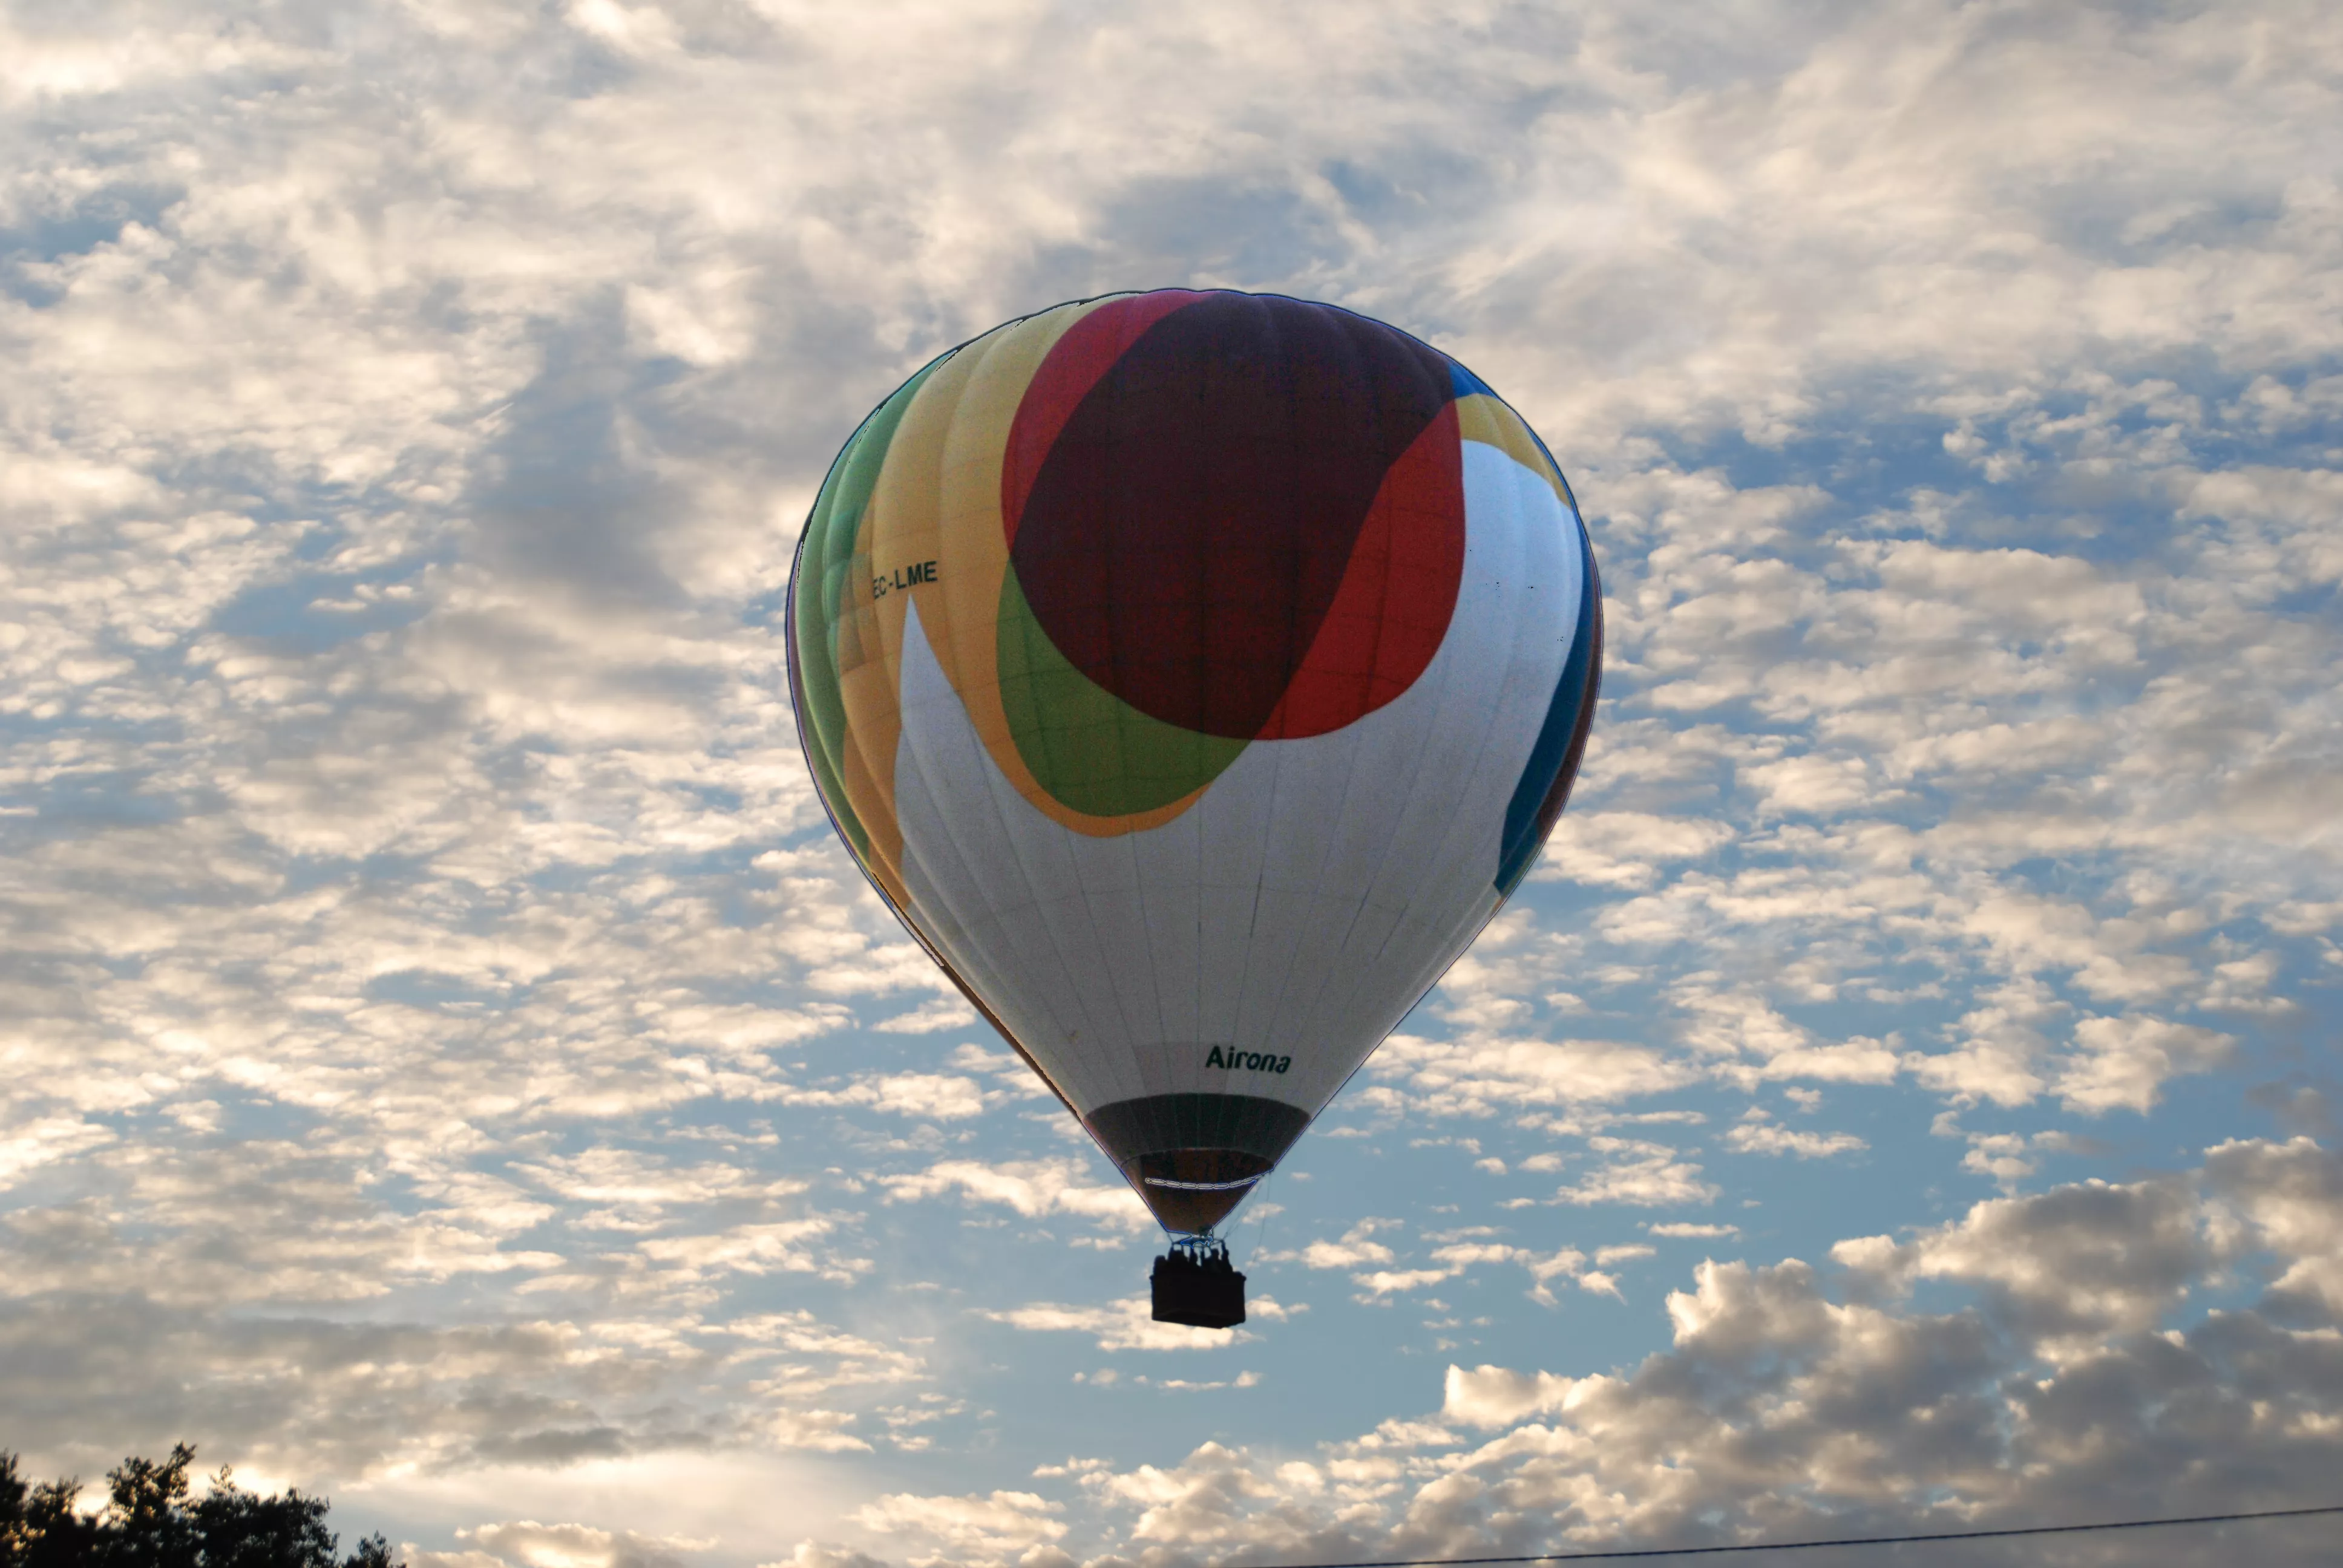 Globos Aerostaticos Teotihuacan in Mexico, North America | Hot Air Ballooning - Rated 0.9